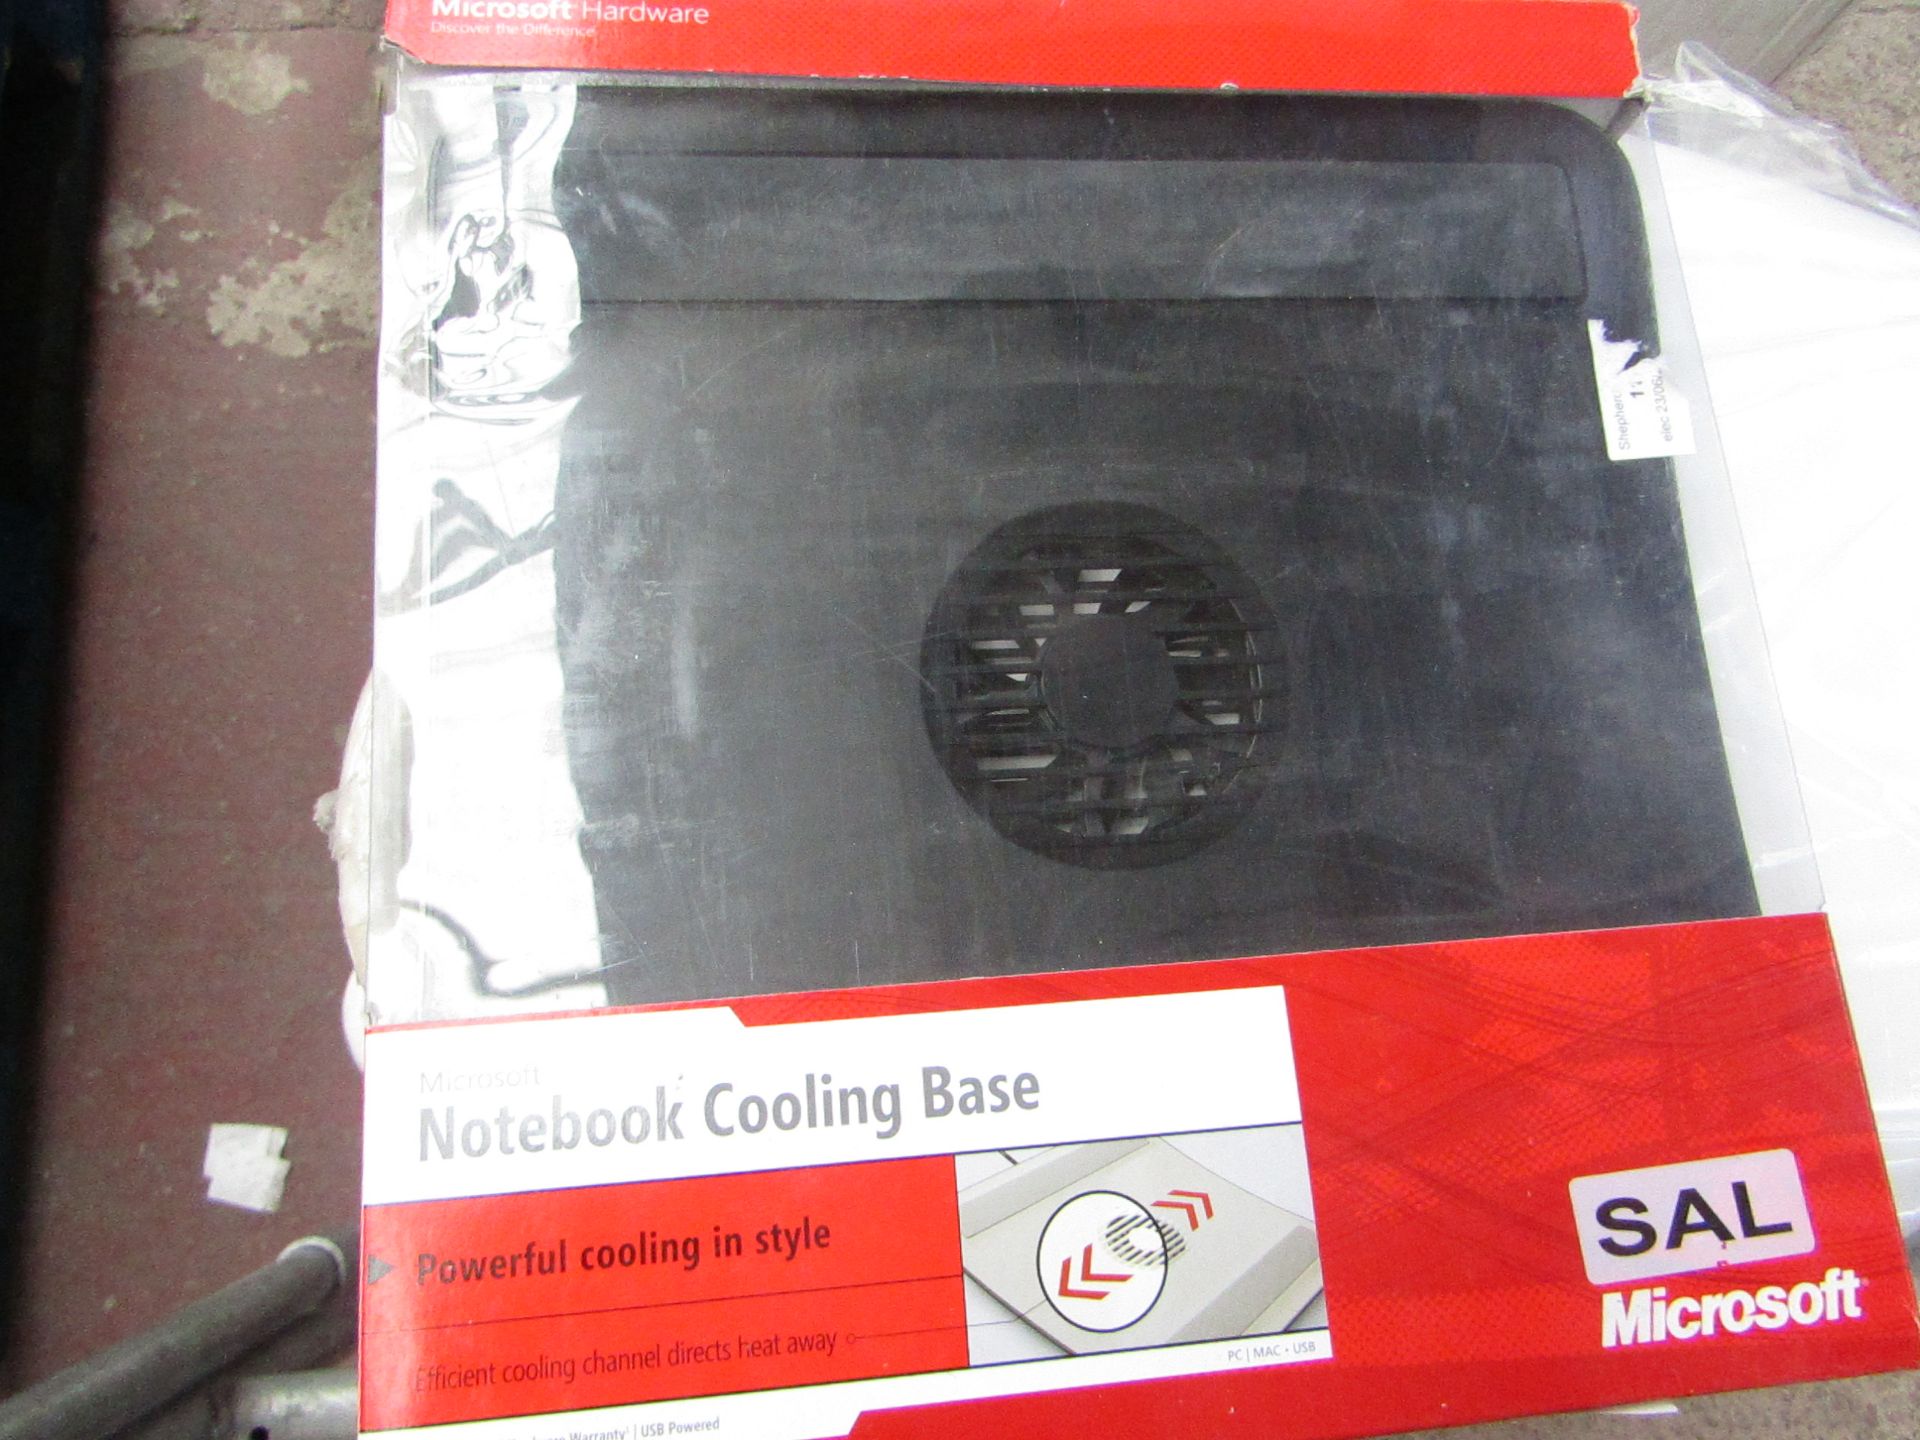 Microsoft notebook cooling base, untested and boxed.